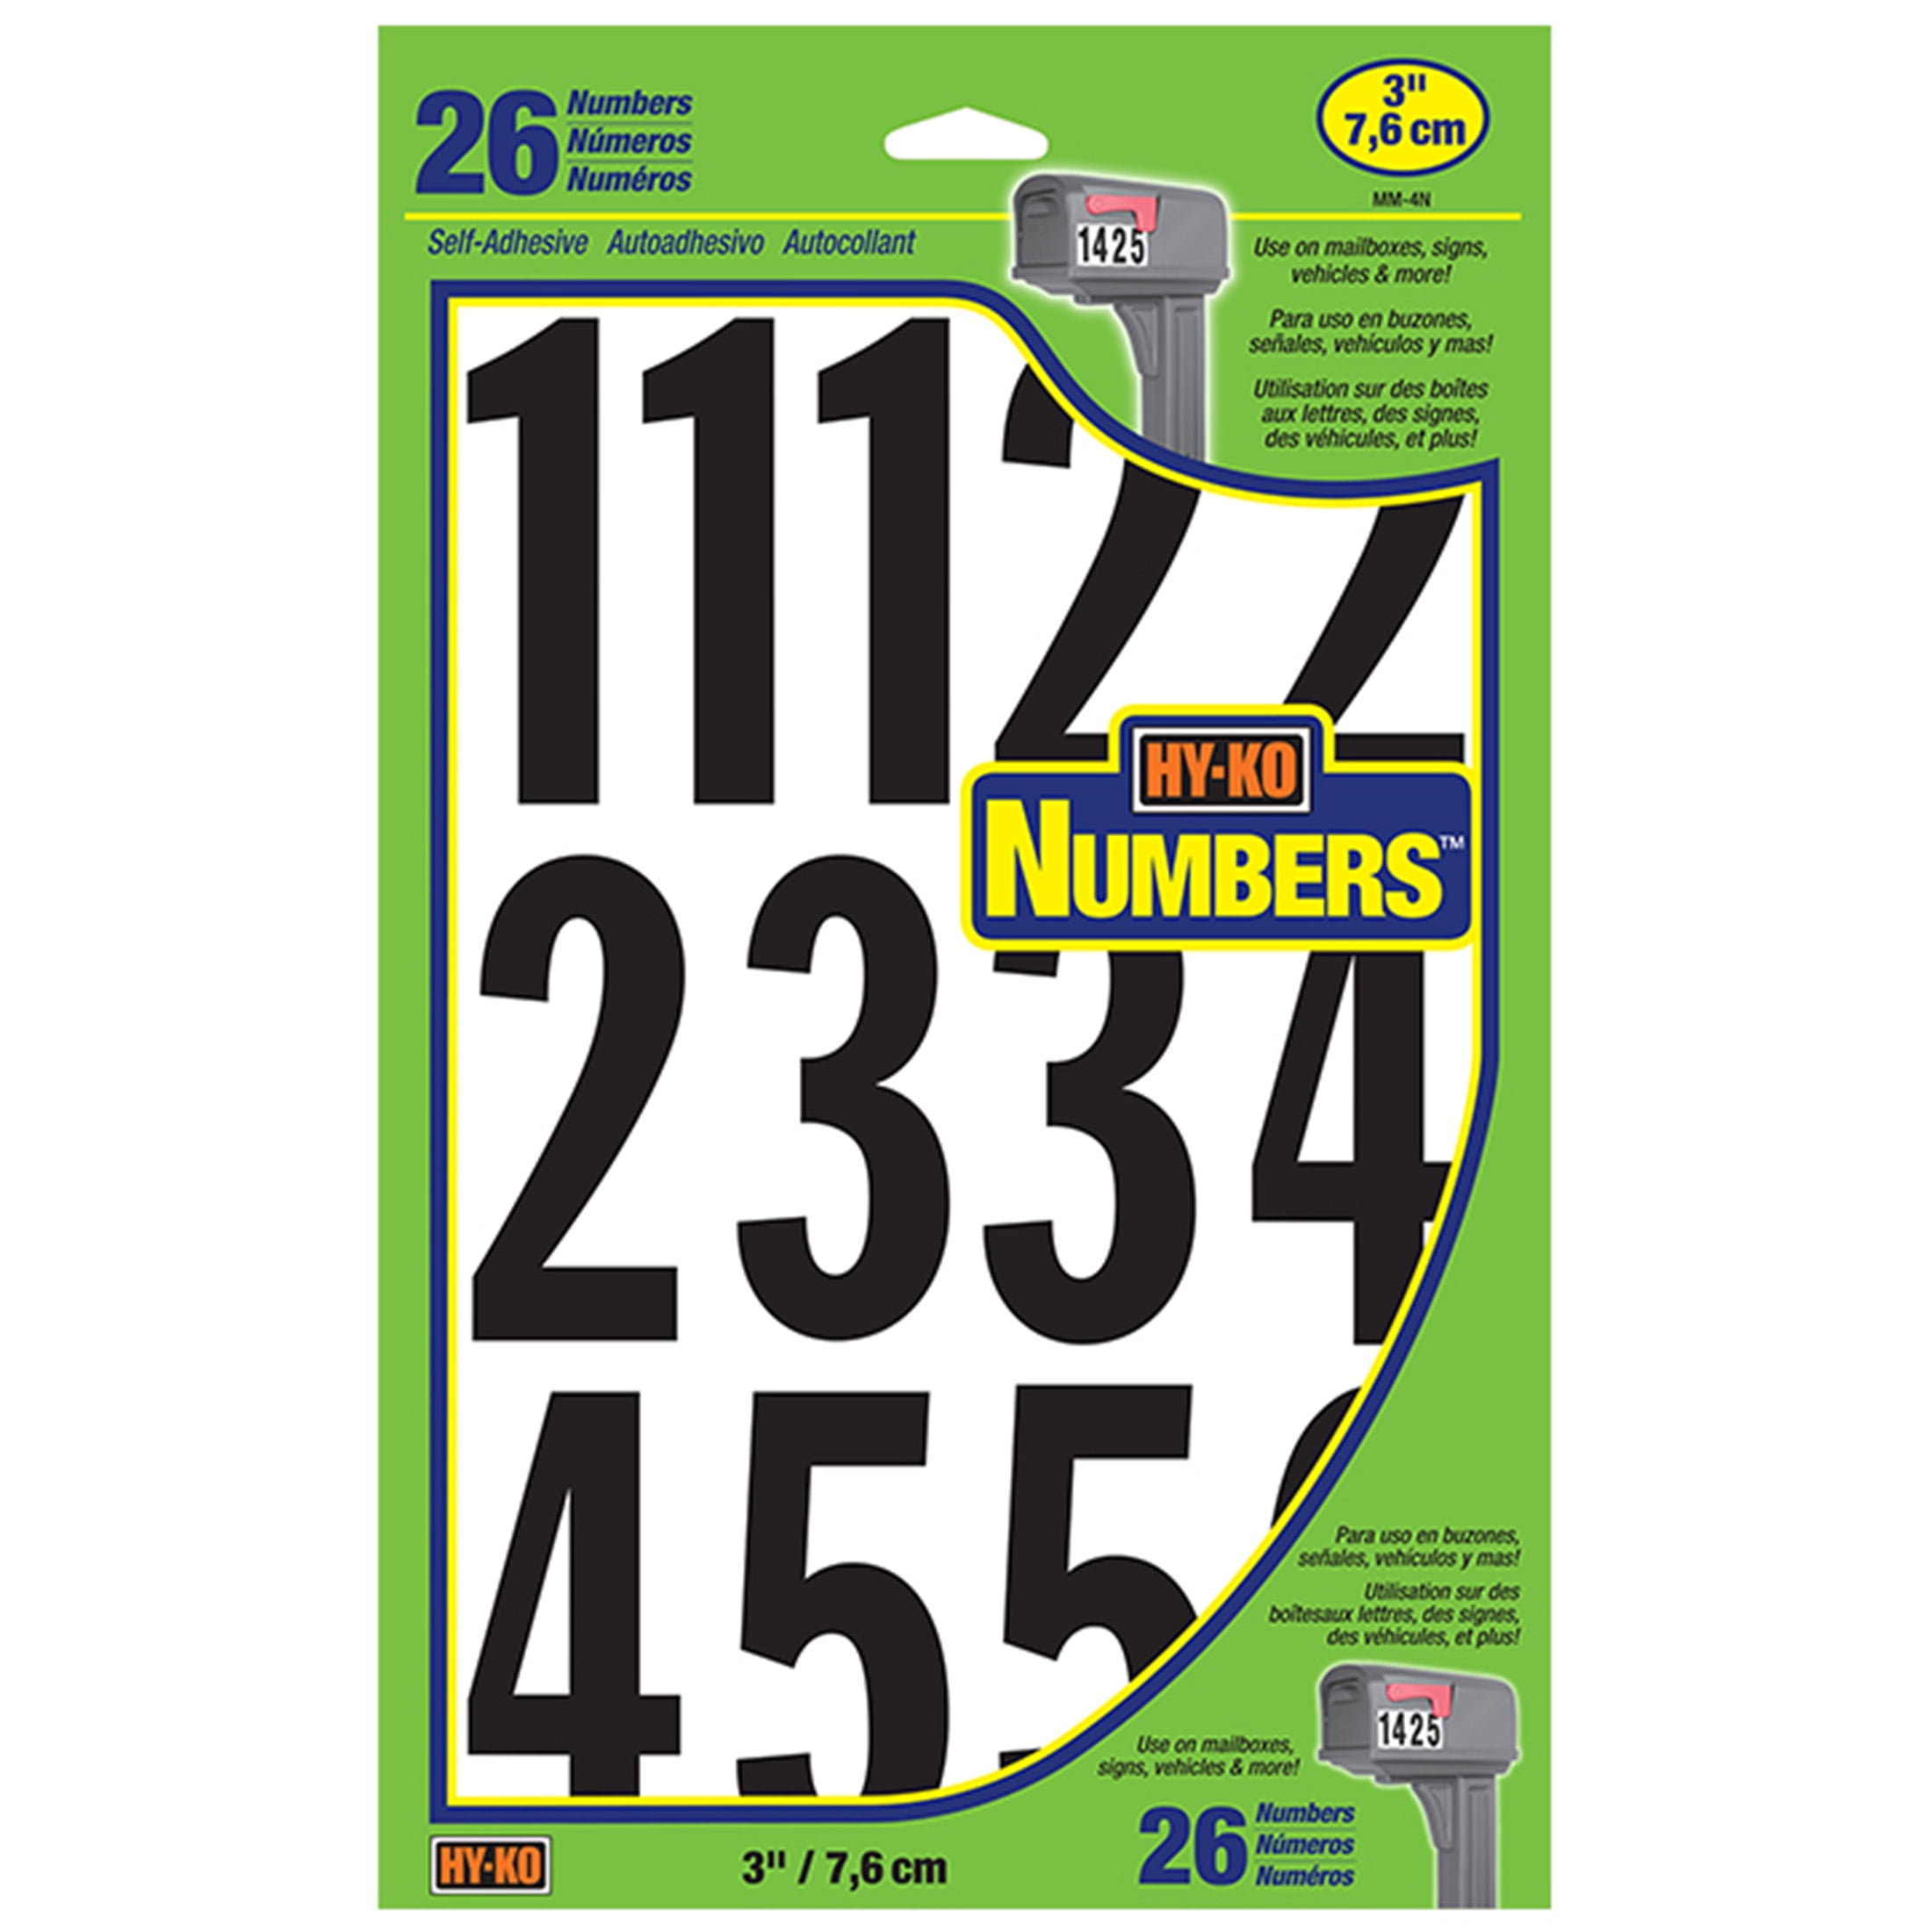 Hy-Ko 1 Vinyl Black and White Self-adhesive Sticker Letters and Numbers  Set 